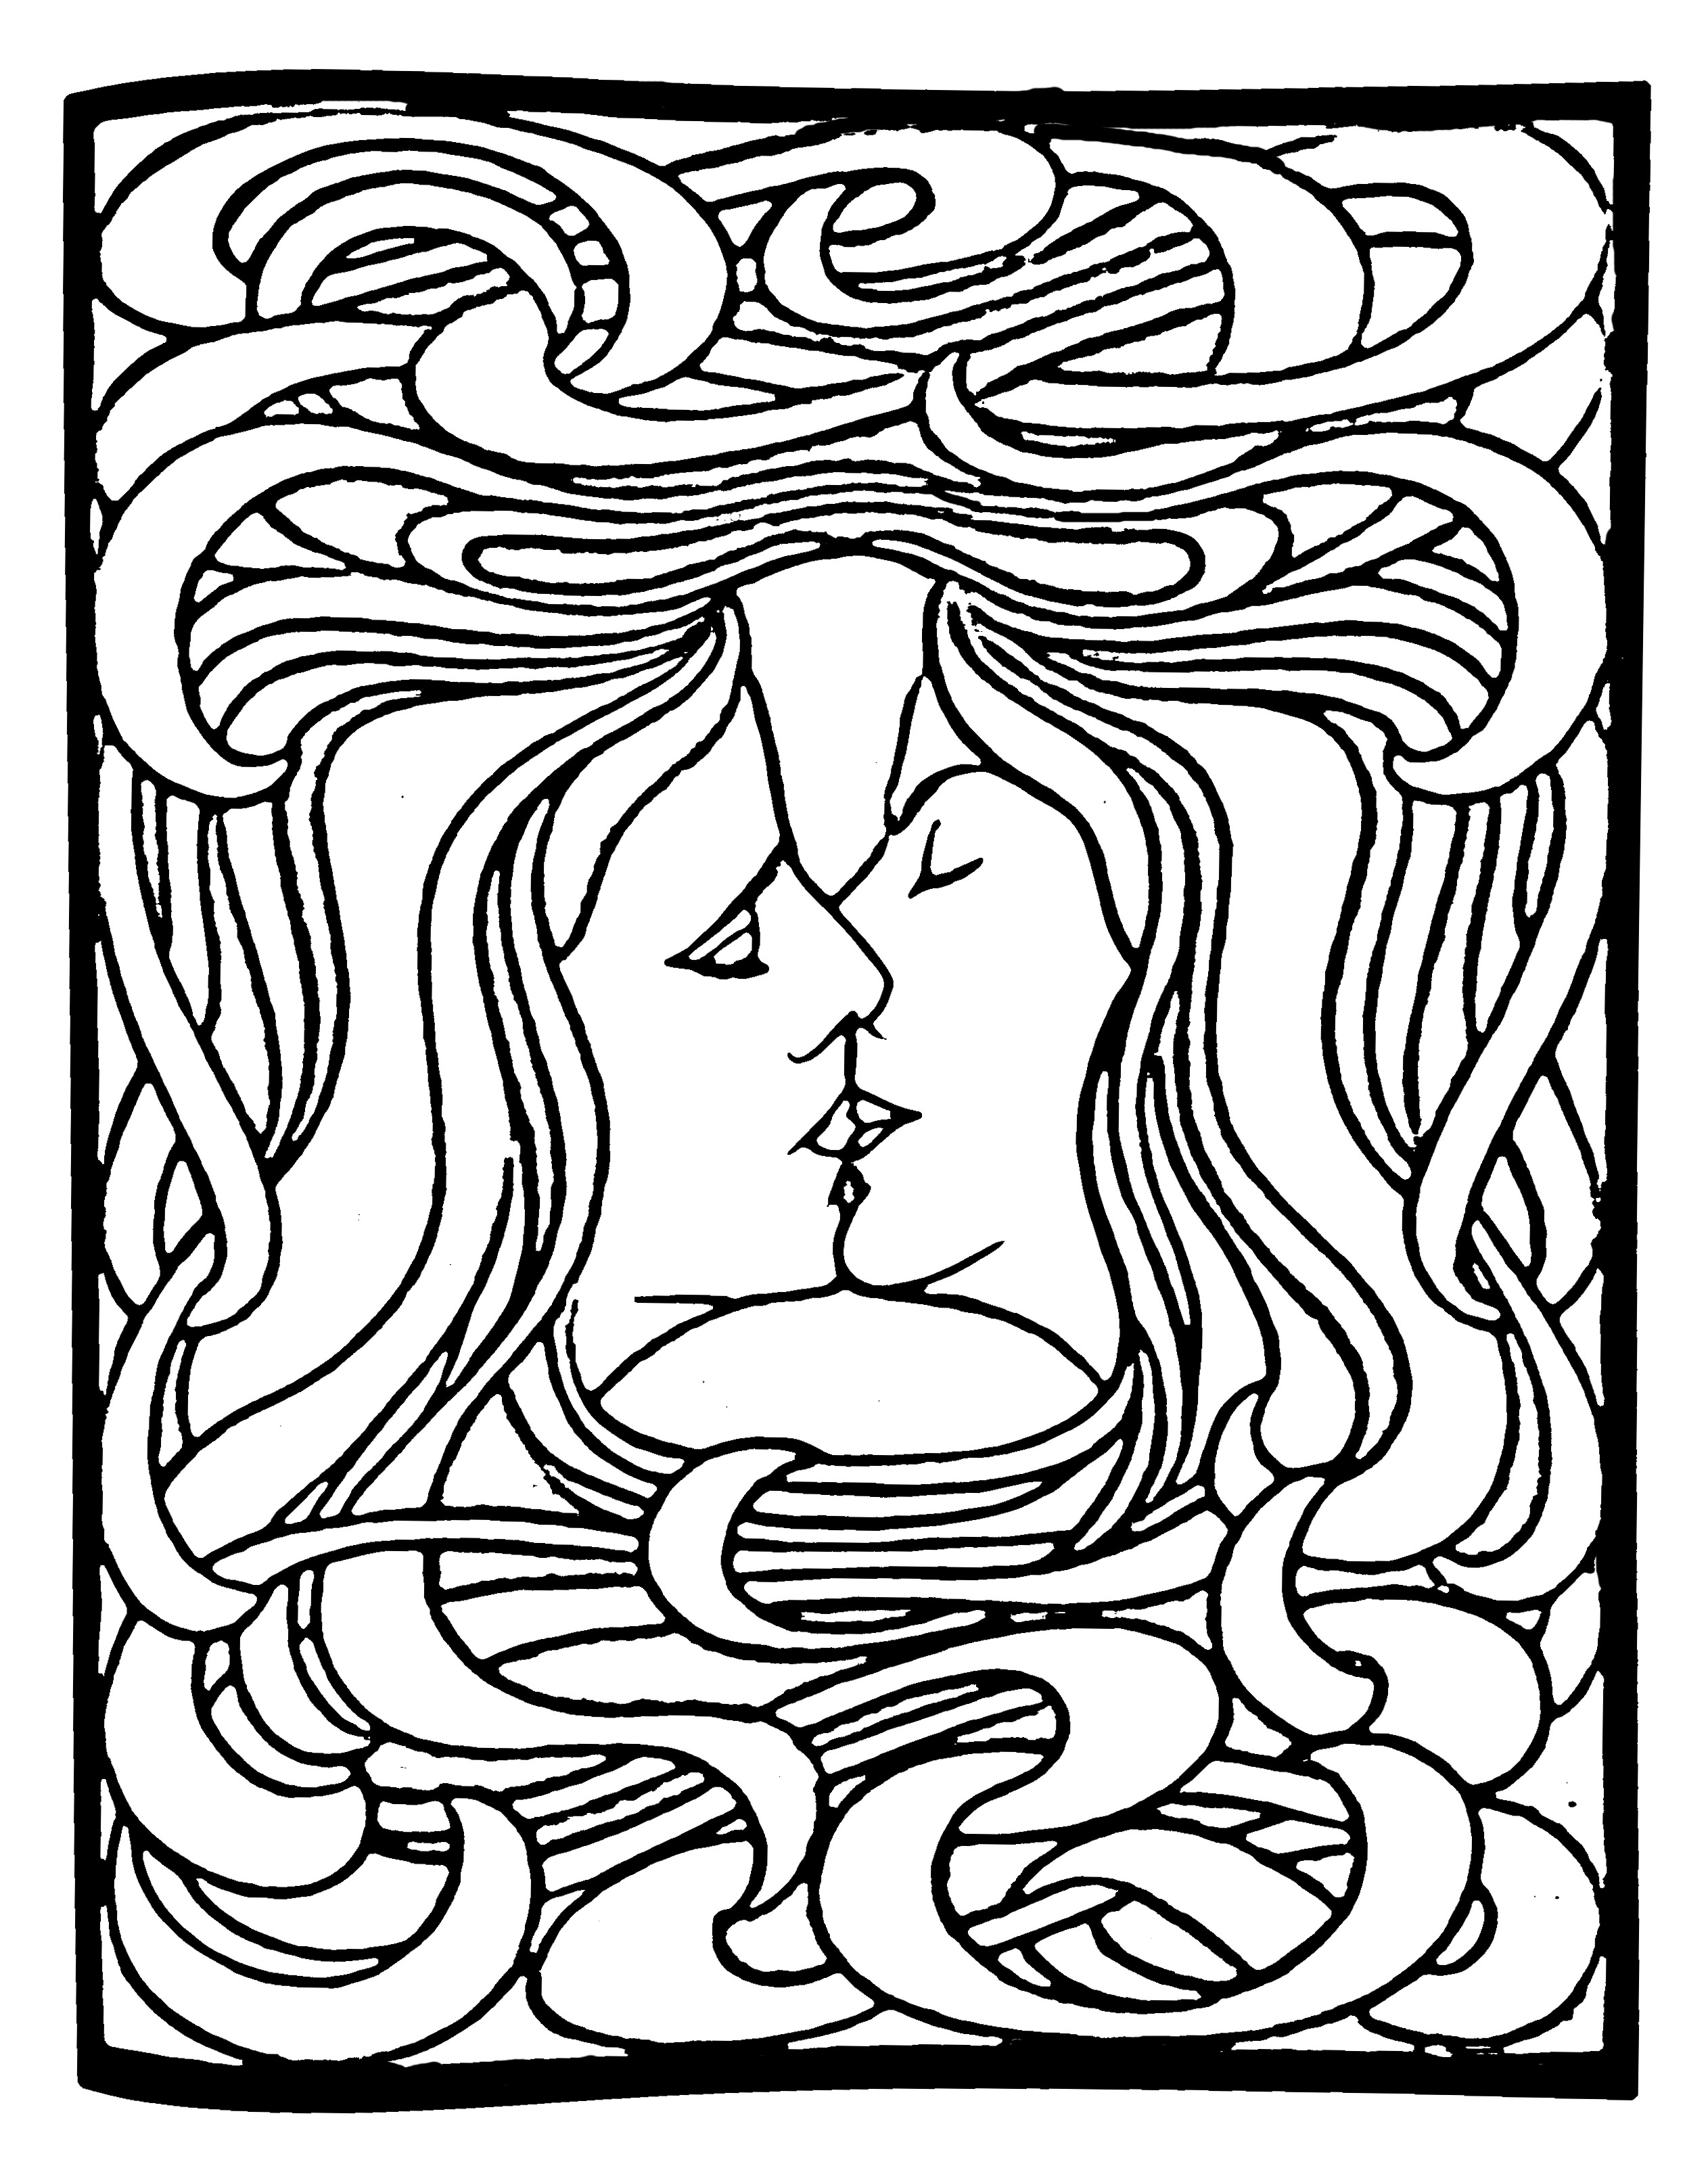 Coloring art nouveau from le baiser by peter behrens 1898